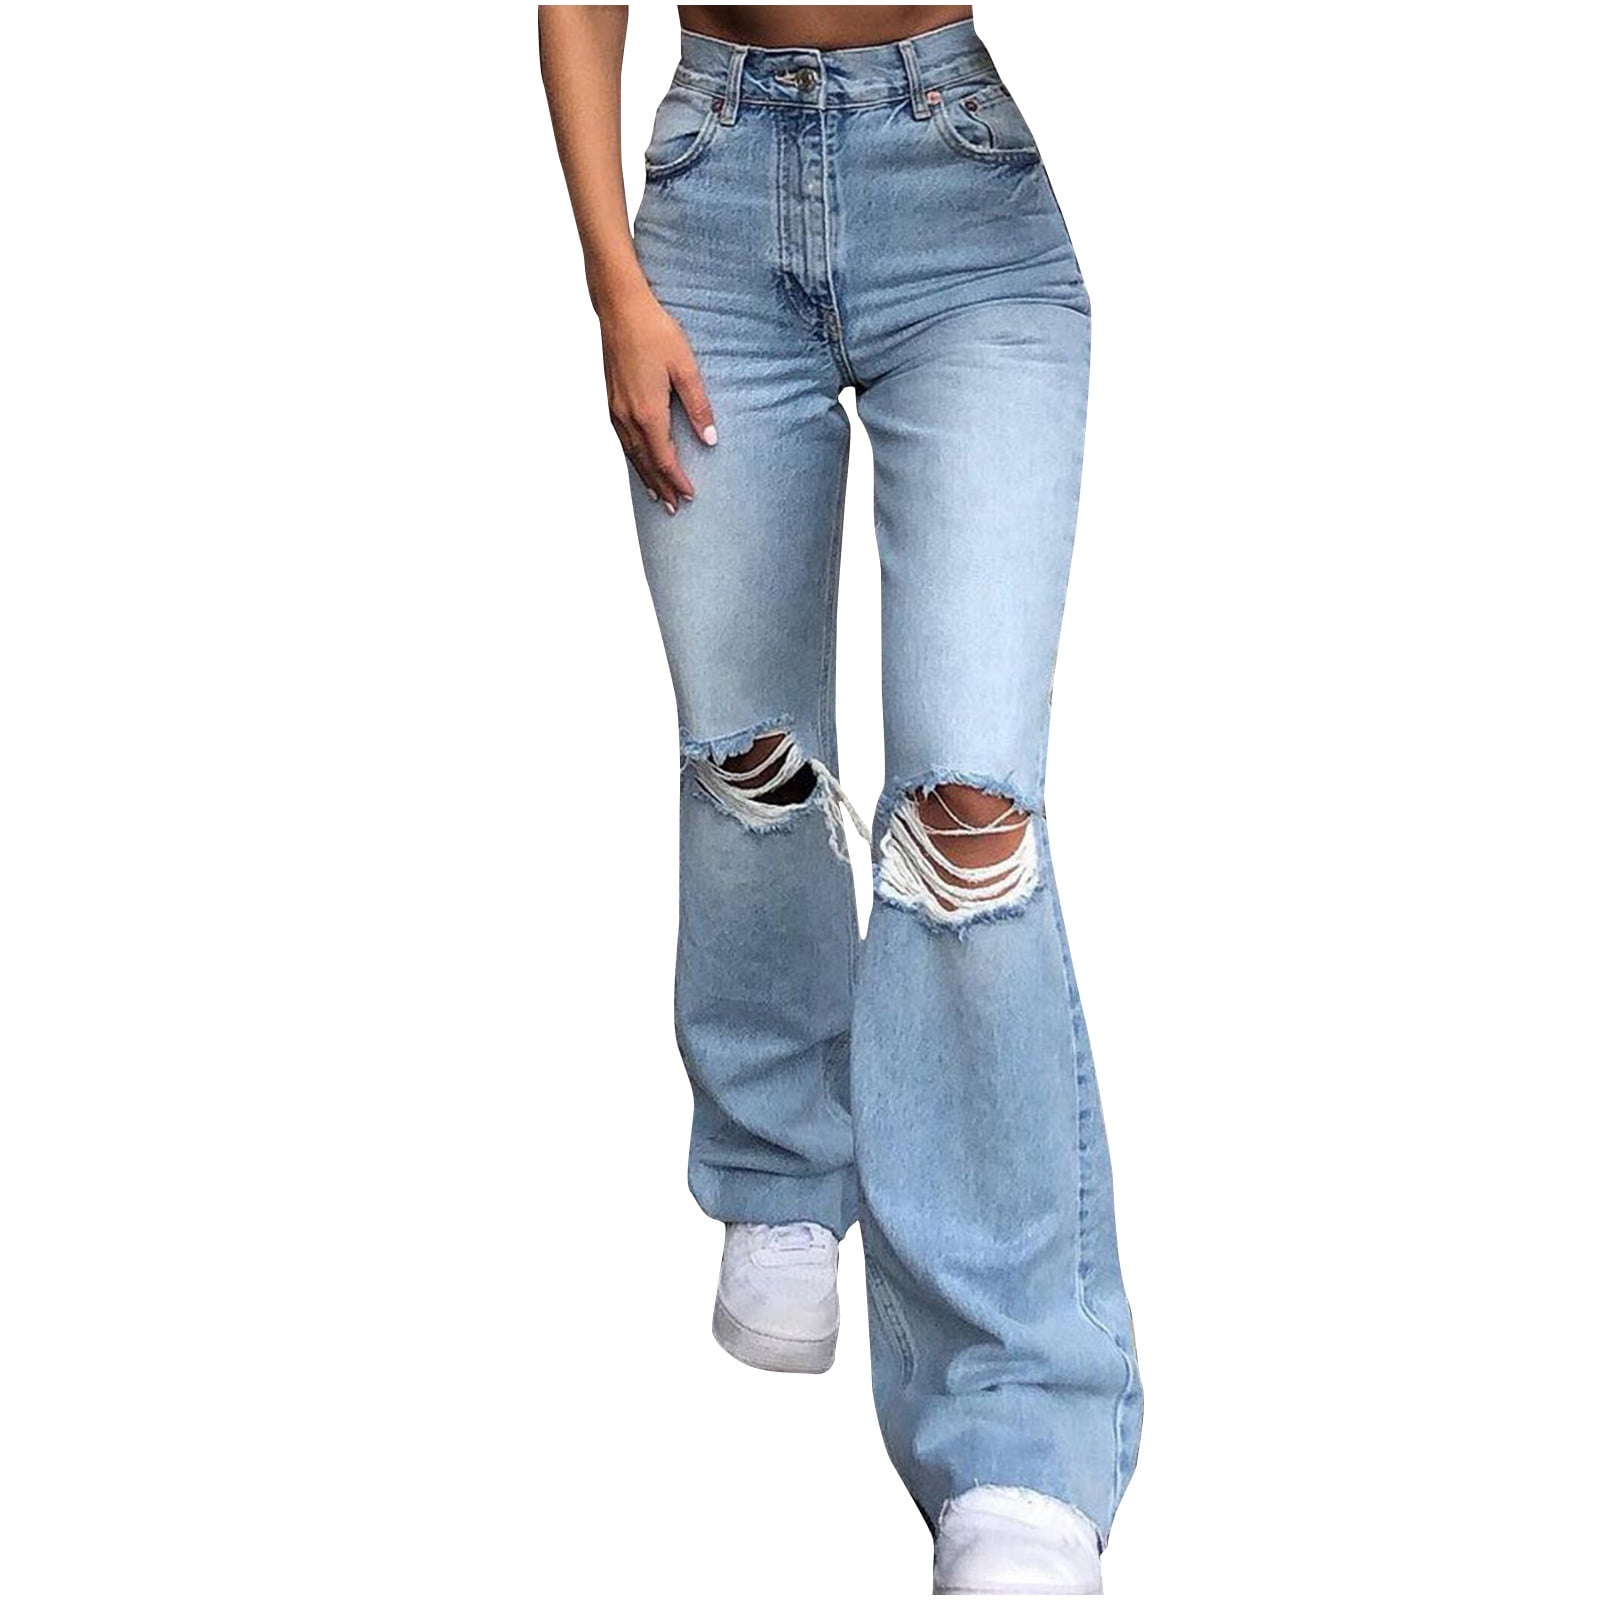 Hfyihgf Women's Ripped Flare Jeans Distressed Bootcut Jeans Stretch Bell  Bottom Denim Pants with Pockets(Light Blue,XXL)